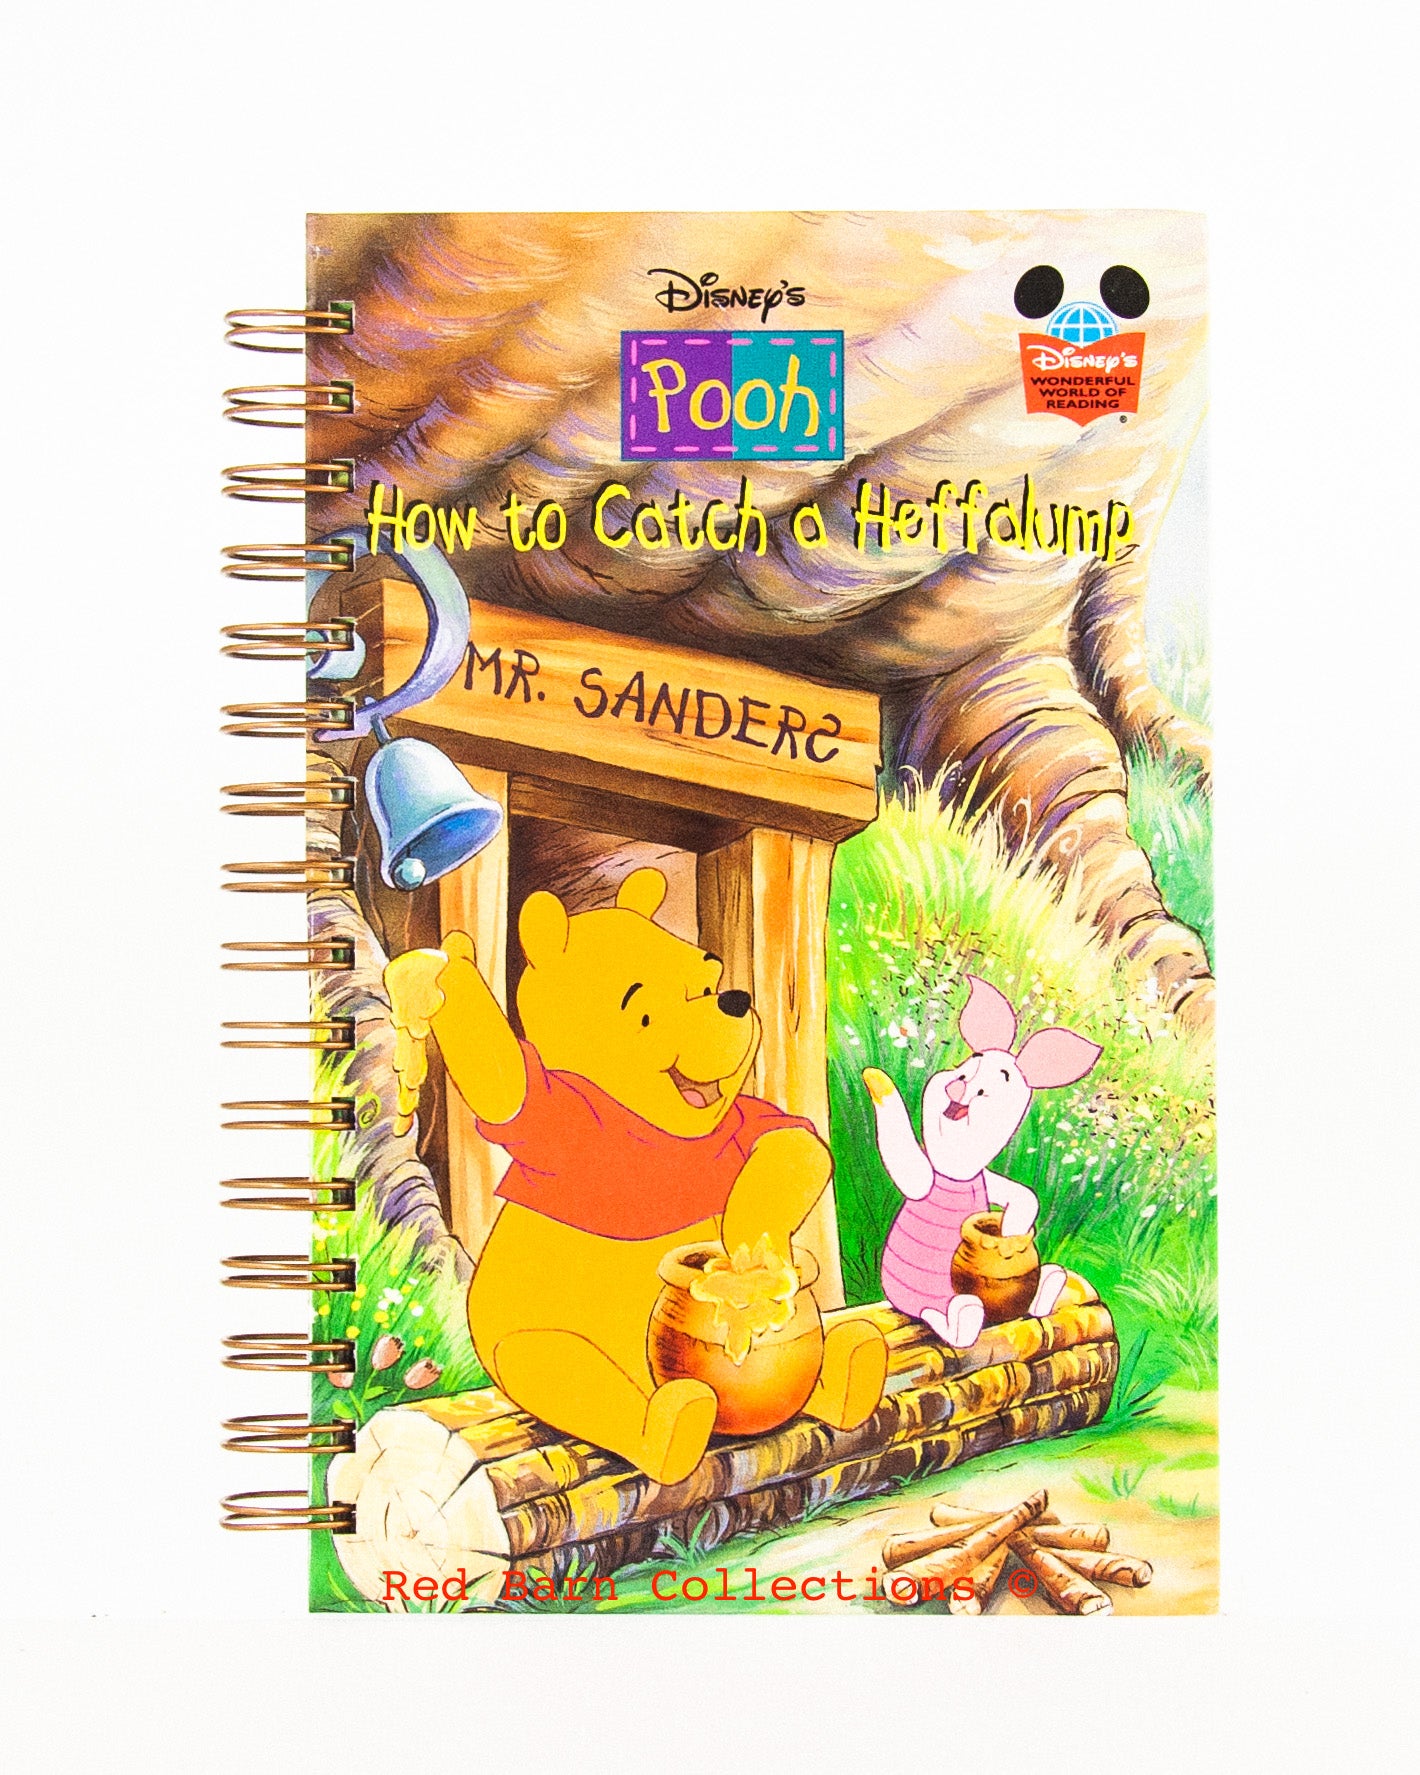 Winnie the Pooh - How to Catch a Heffalump-Red Barn Collections